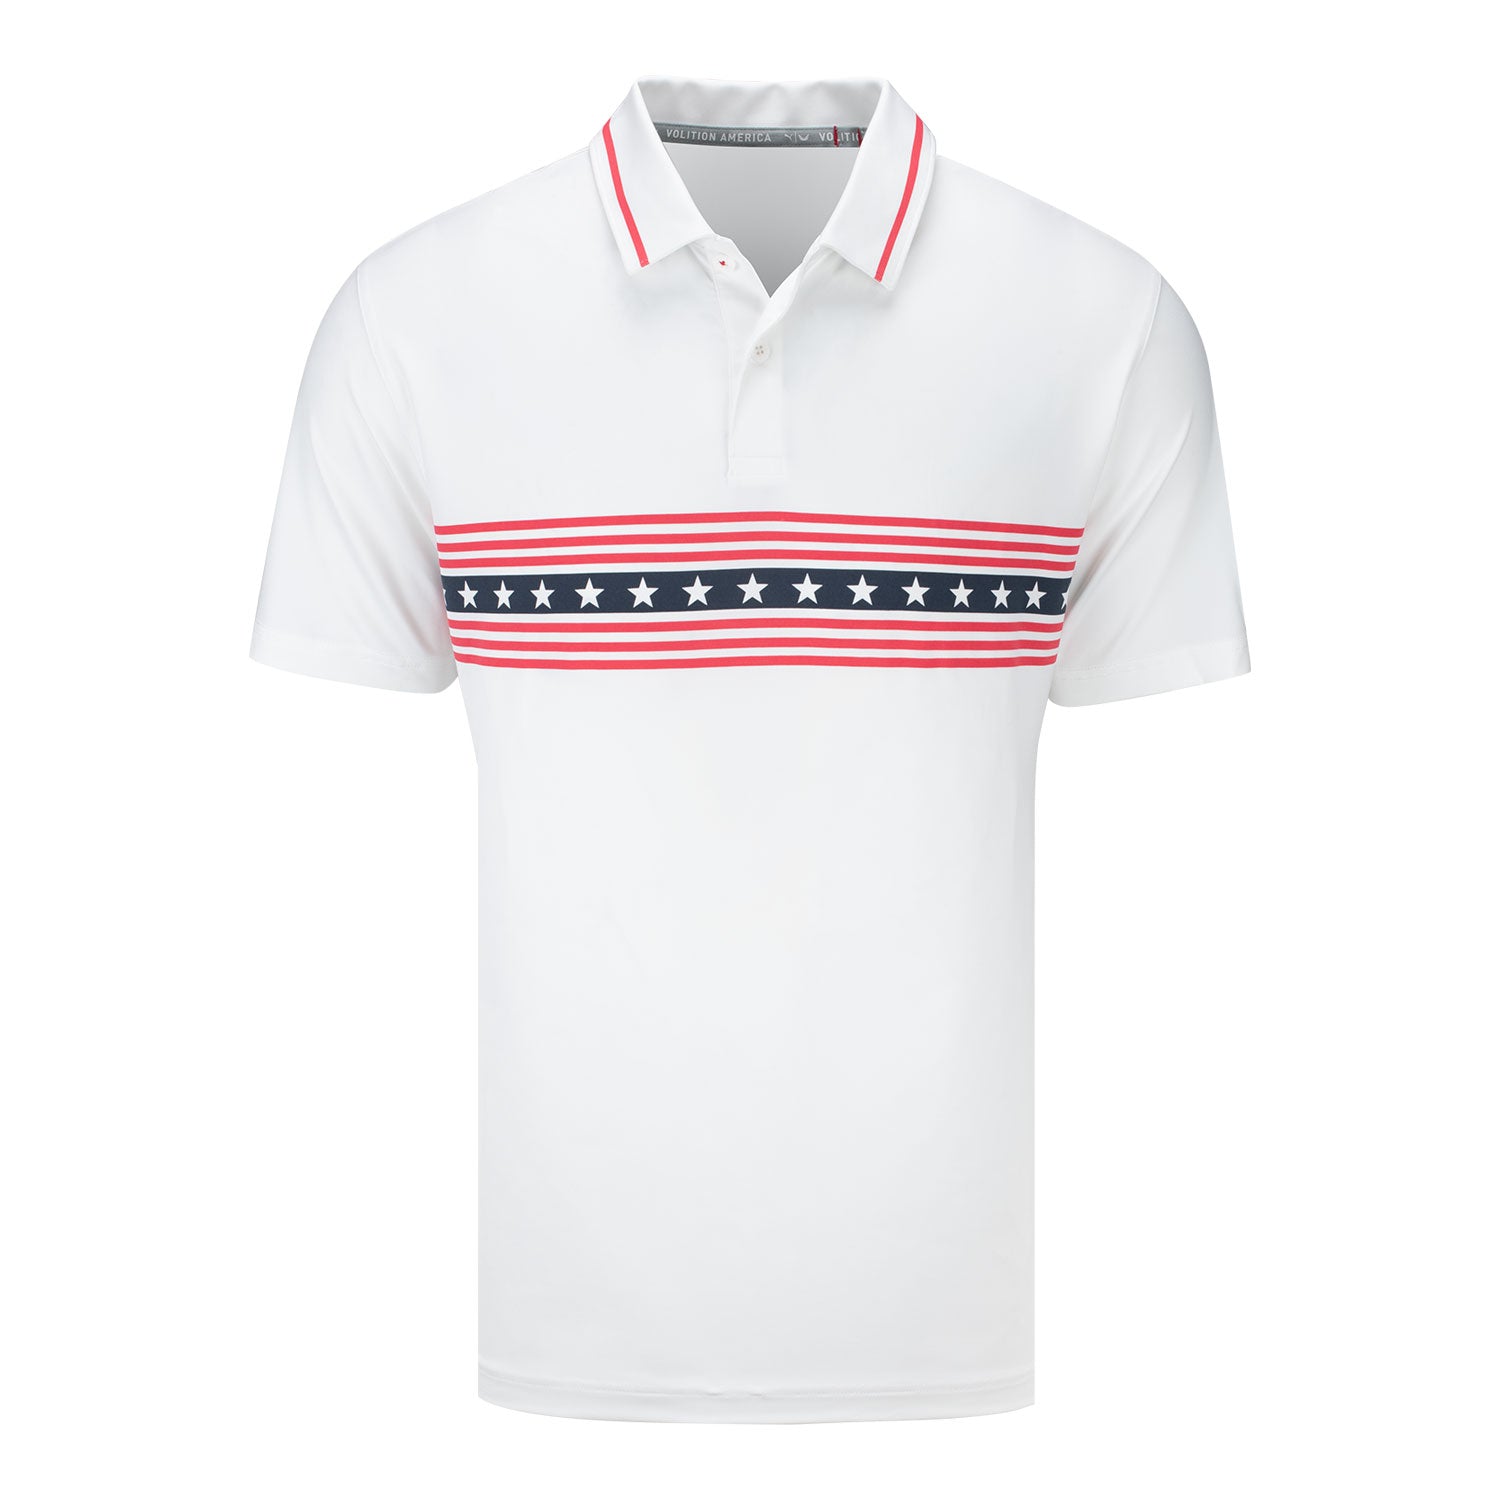 2023 Ryder Cup Merchandise - US Ryder Cup